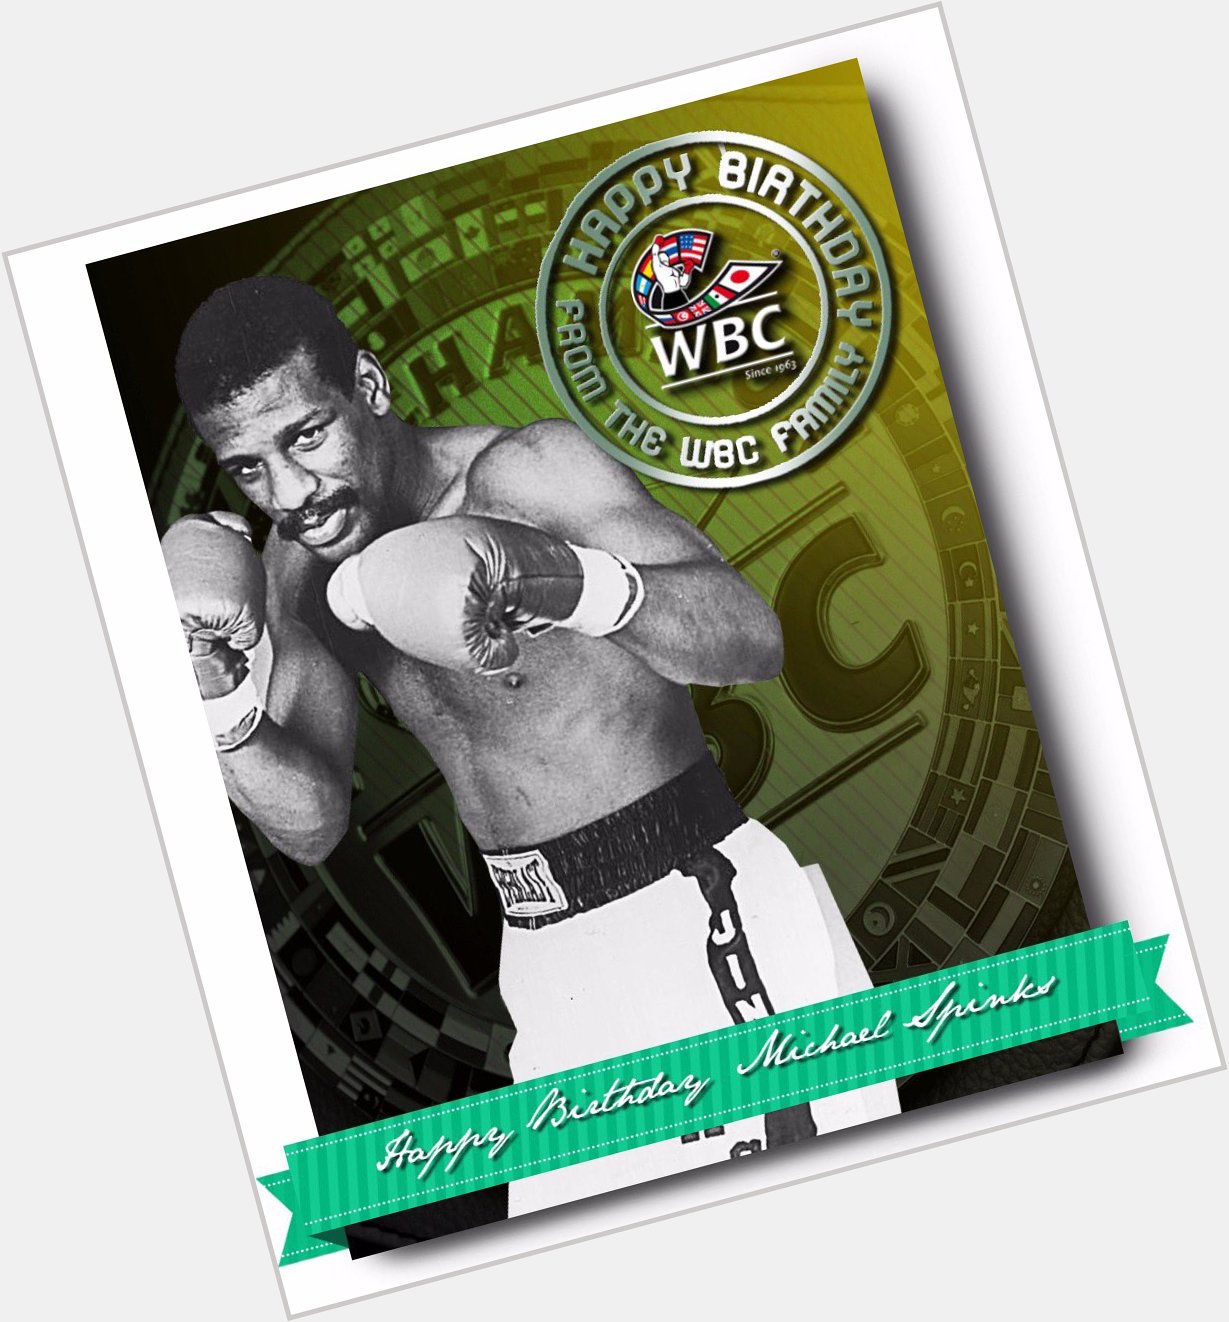 Happy birthday to Michael Spinks and Chad Dawson 